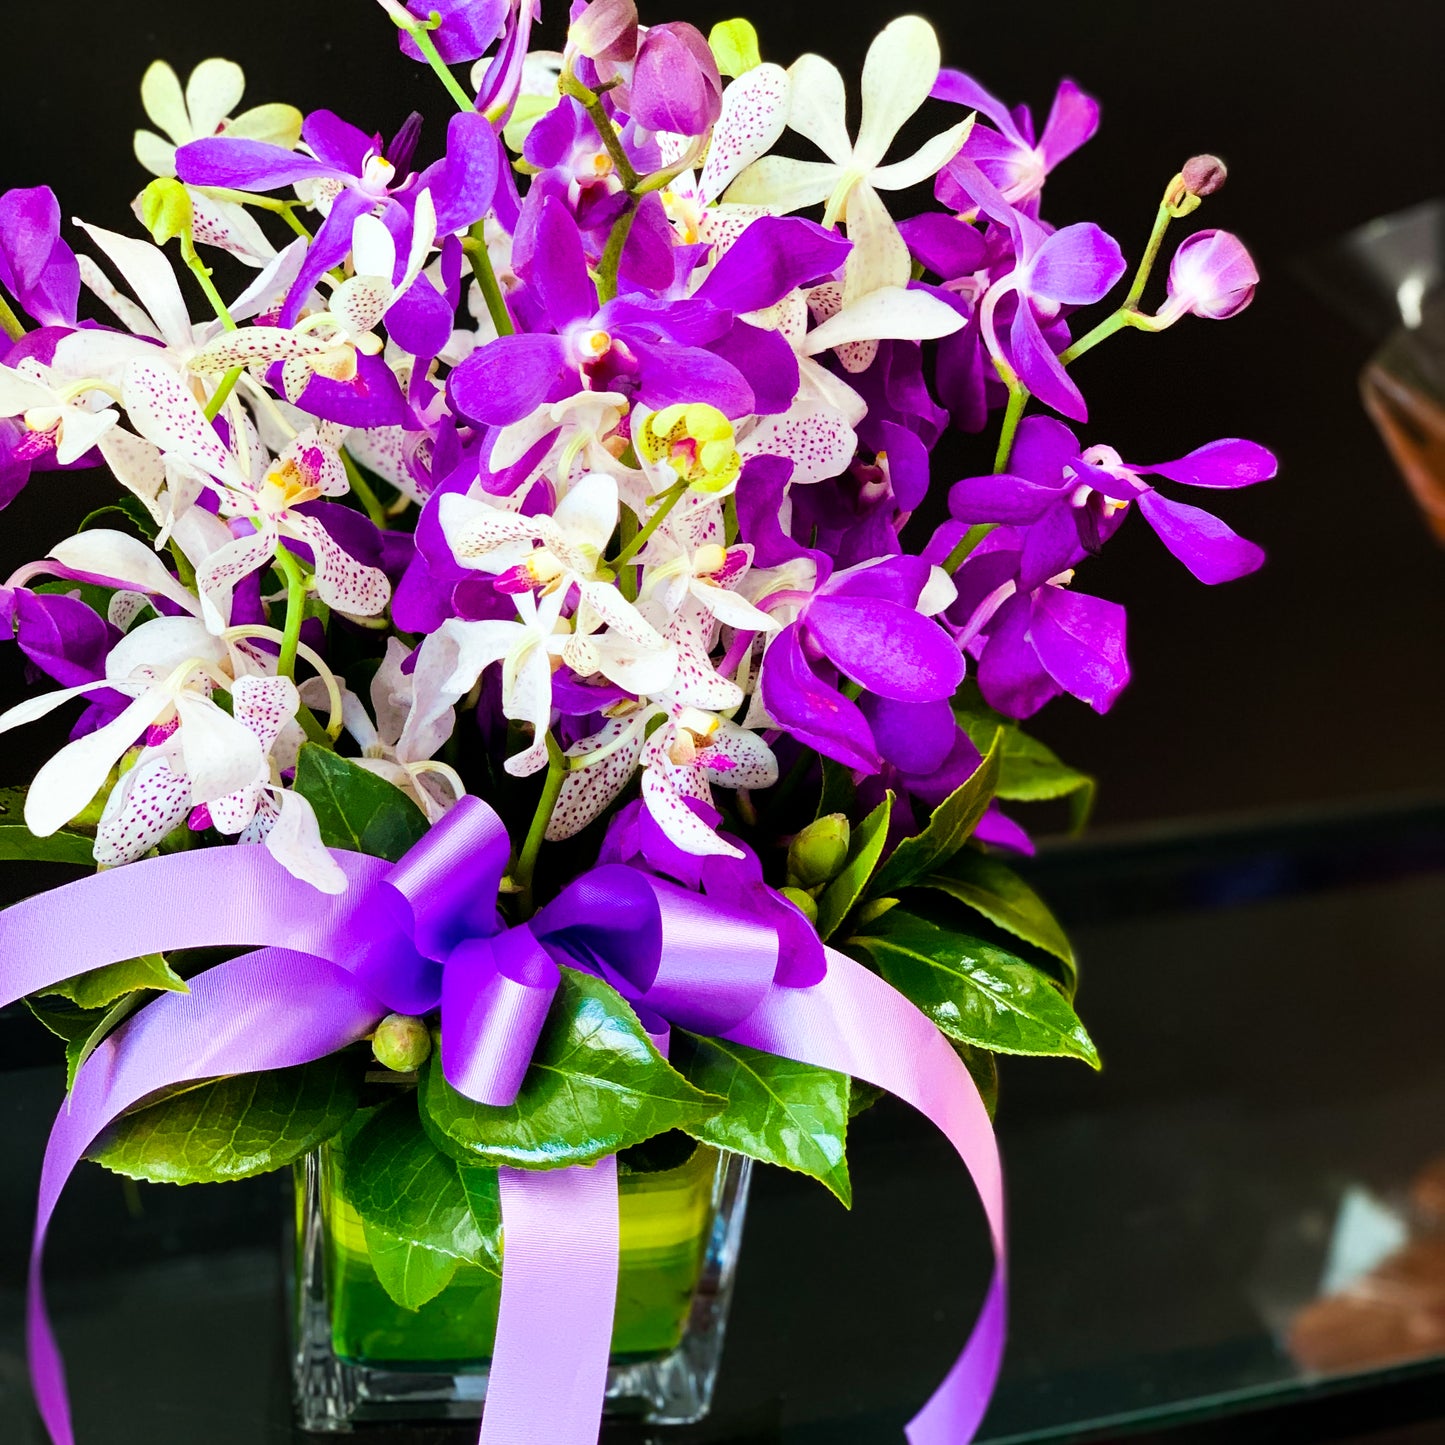 Colourful Orchids in Glass Vase